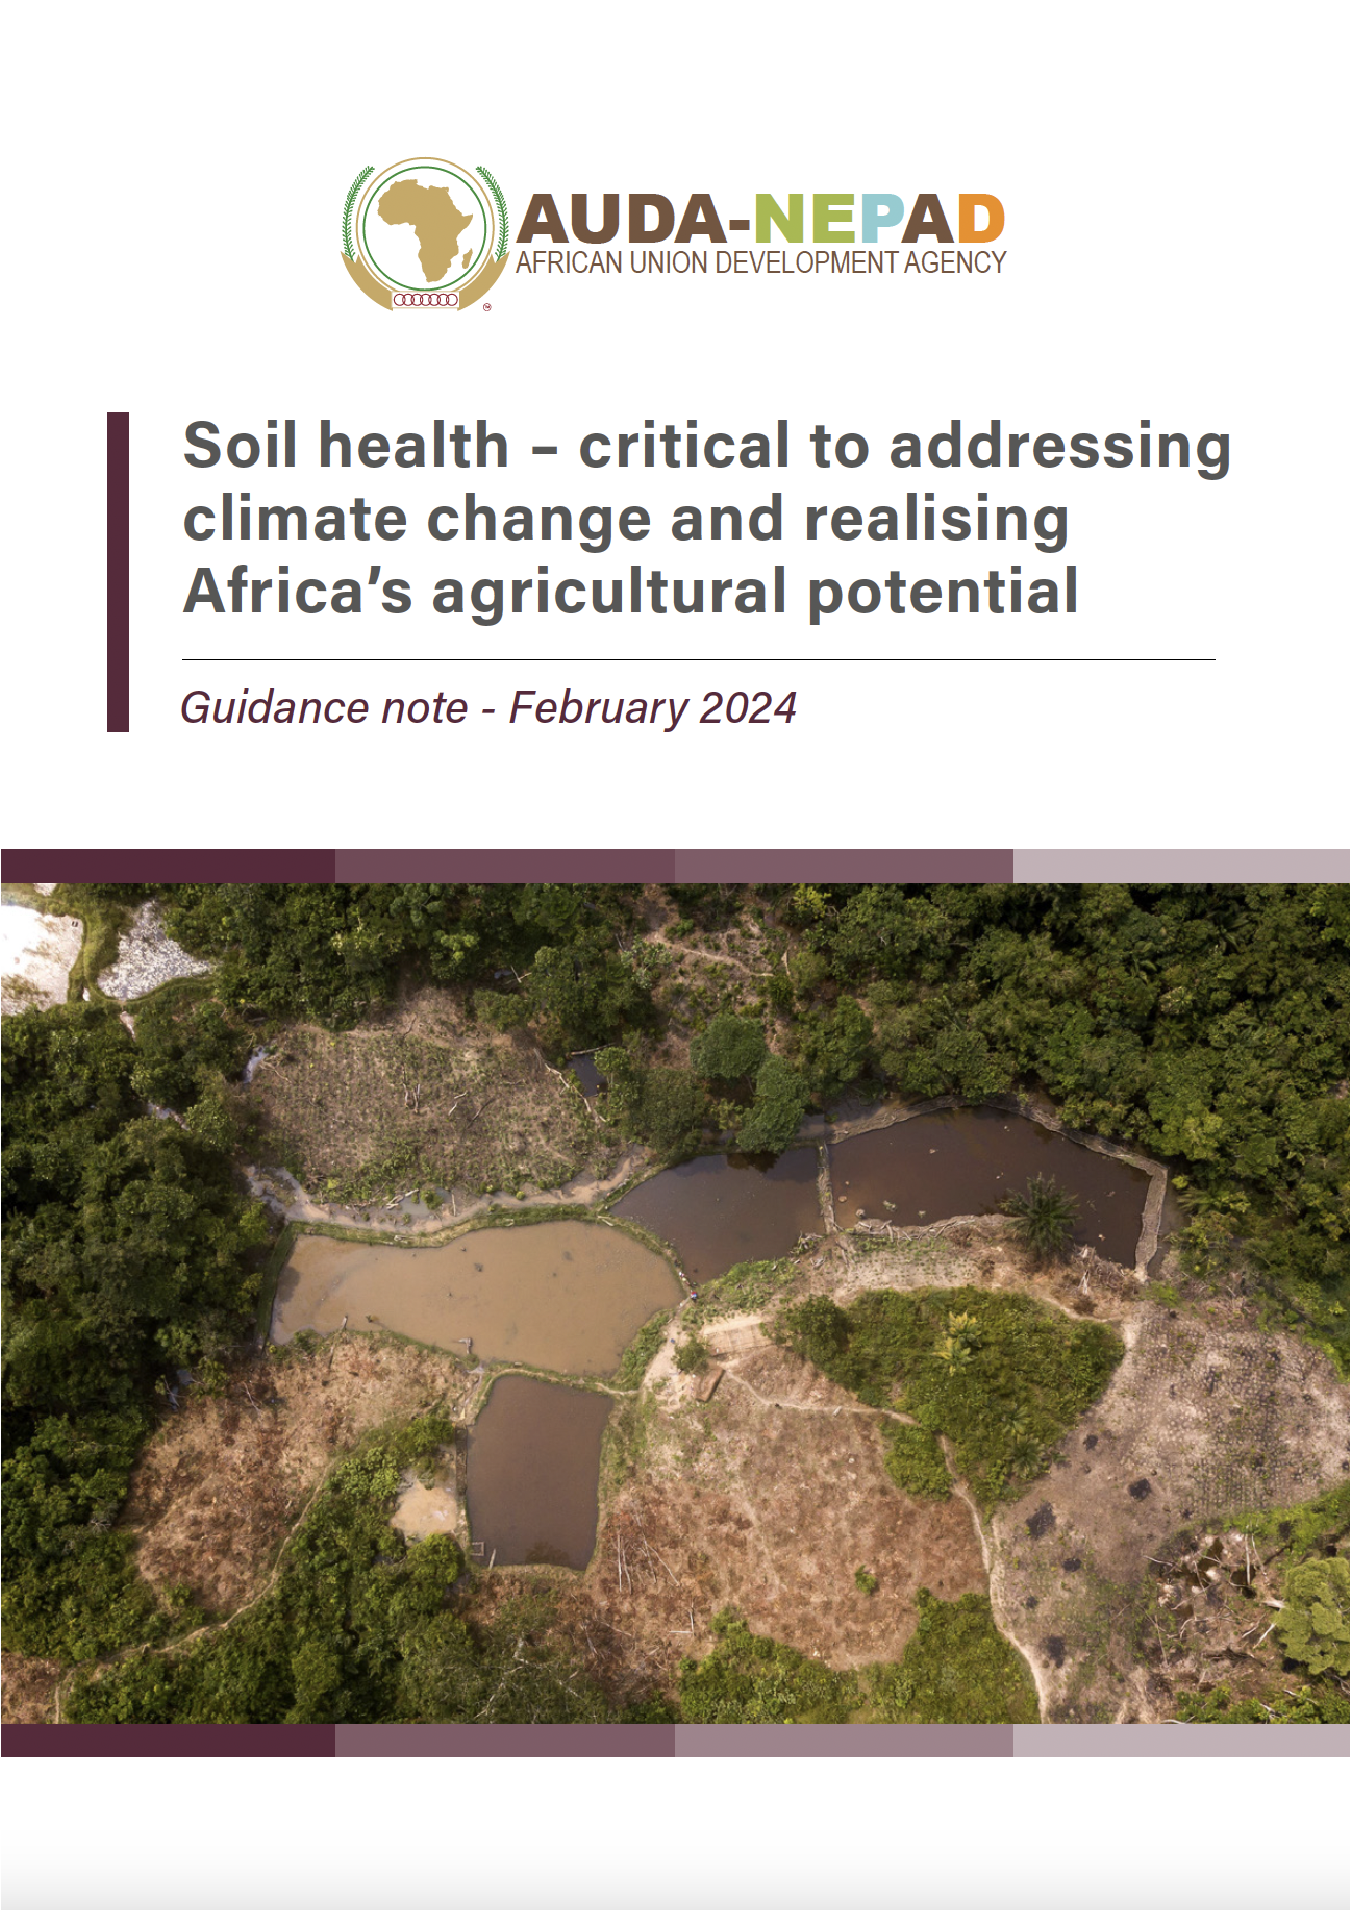 Guidance Note: Soil health – critical to addressing climate change and realising Africa’s agricultural potential